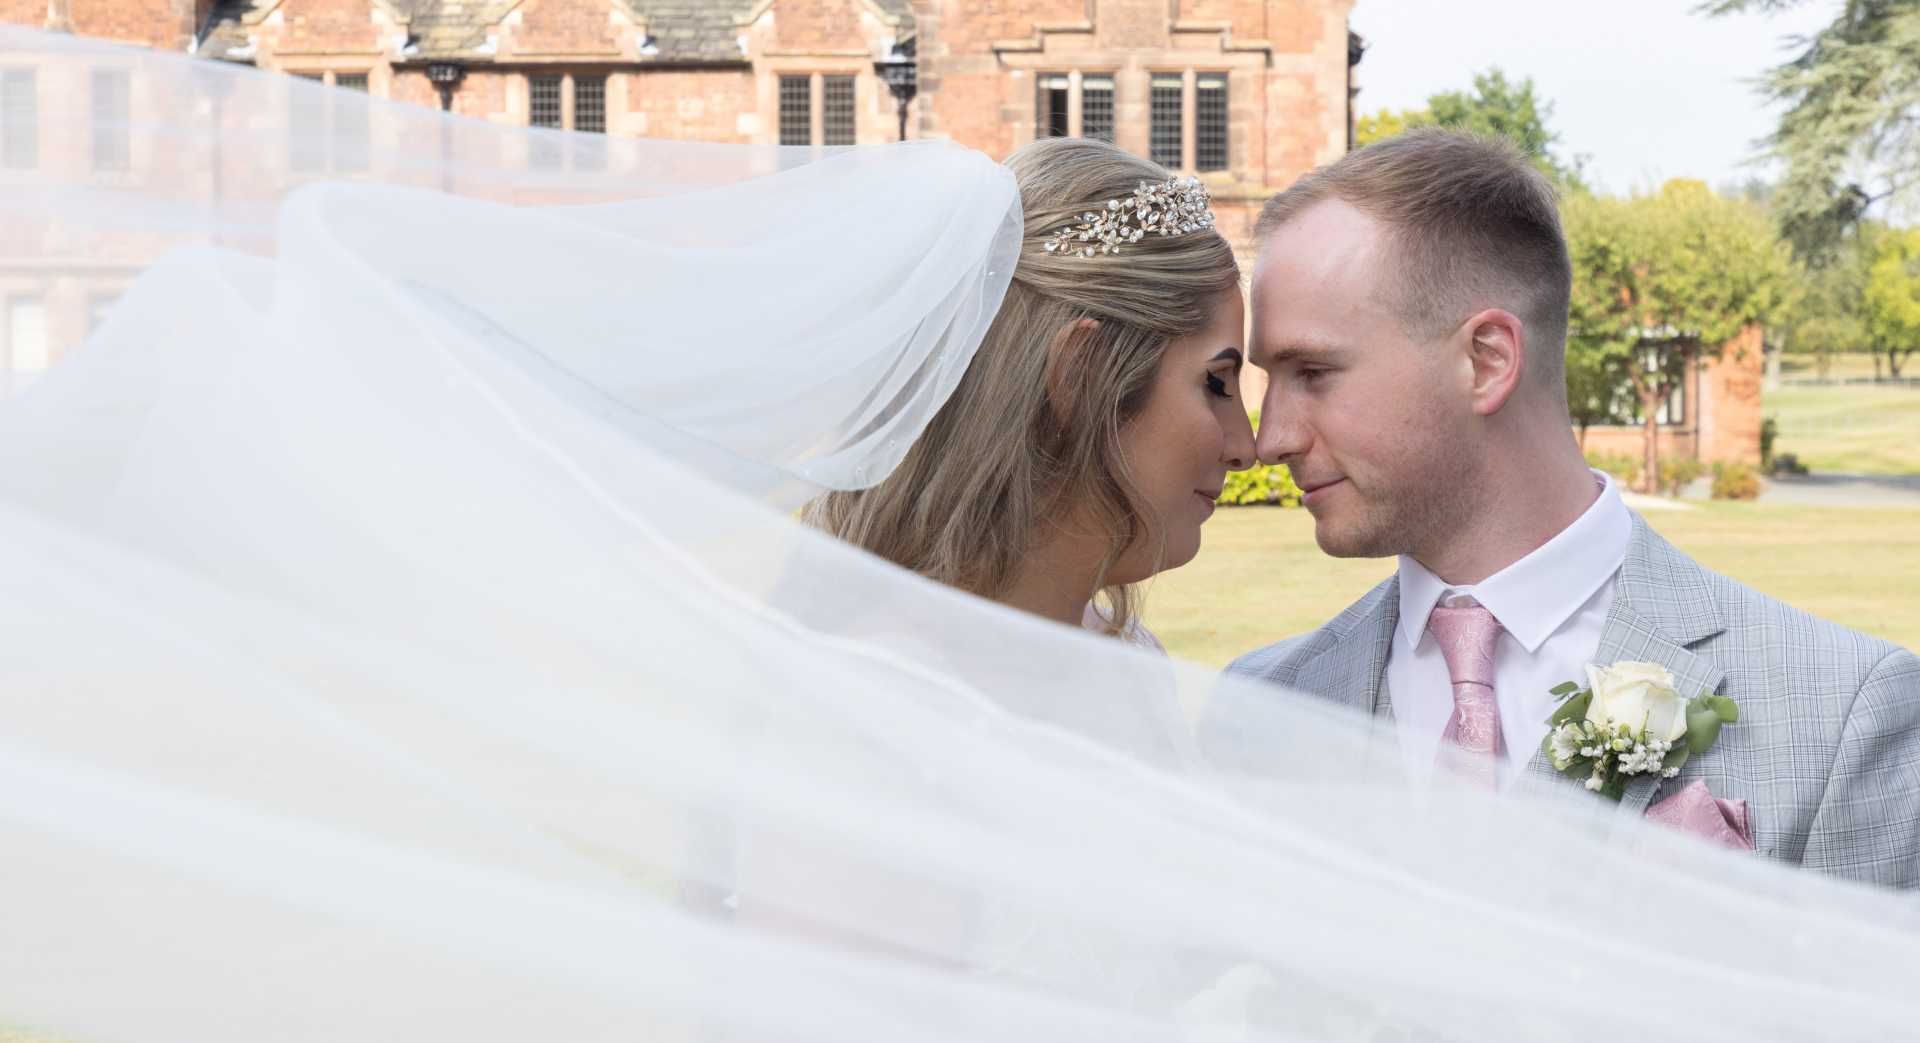 Rick Dell Photography - Award Winning Wedding Photography in Manchester